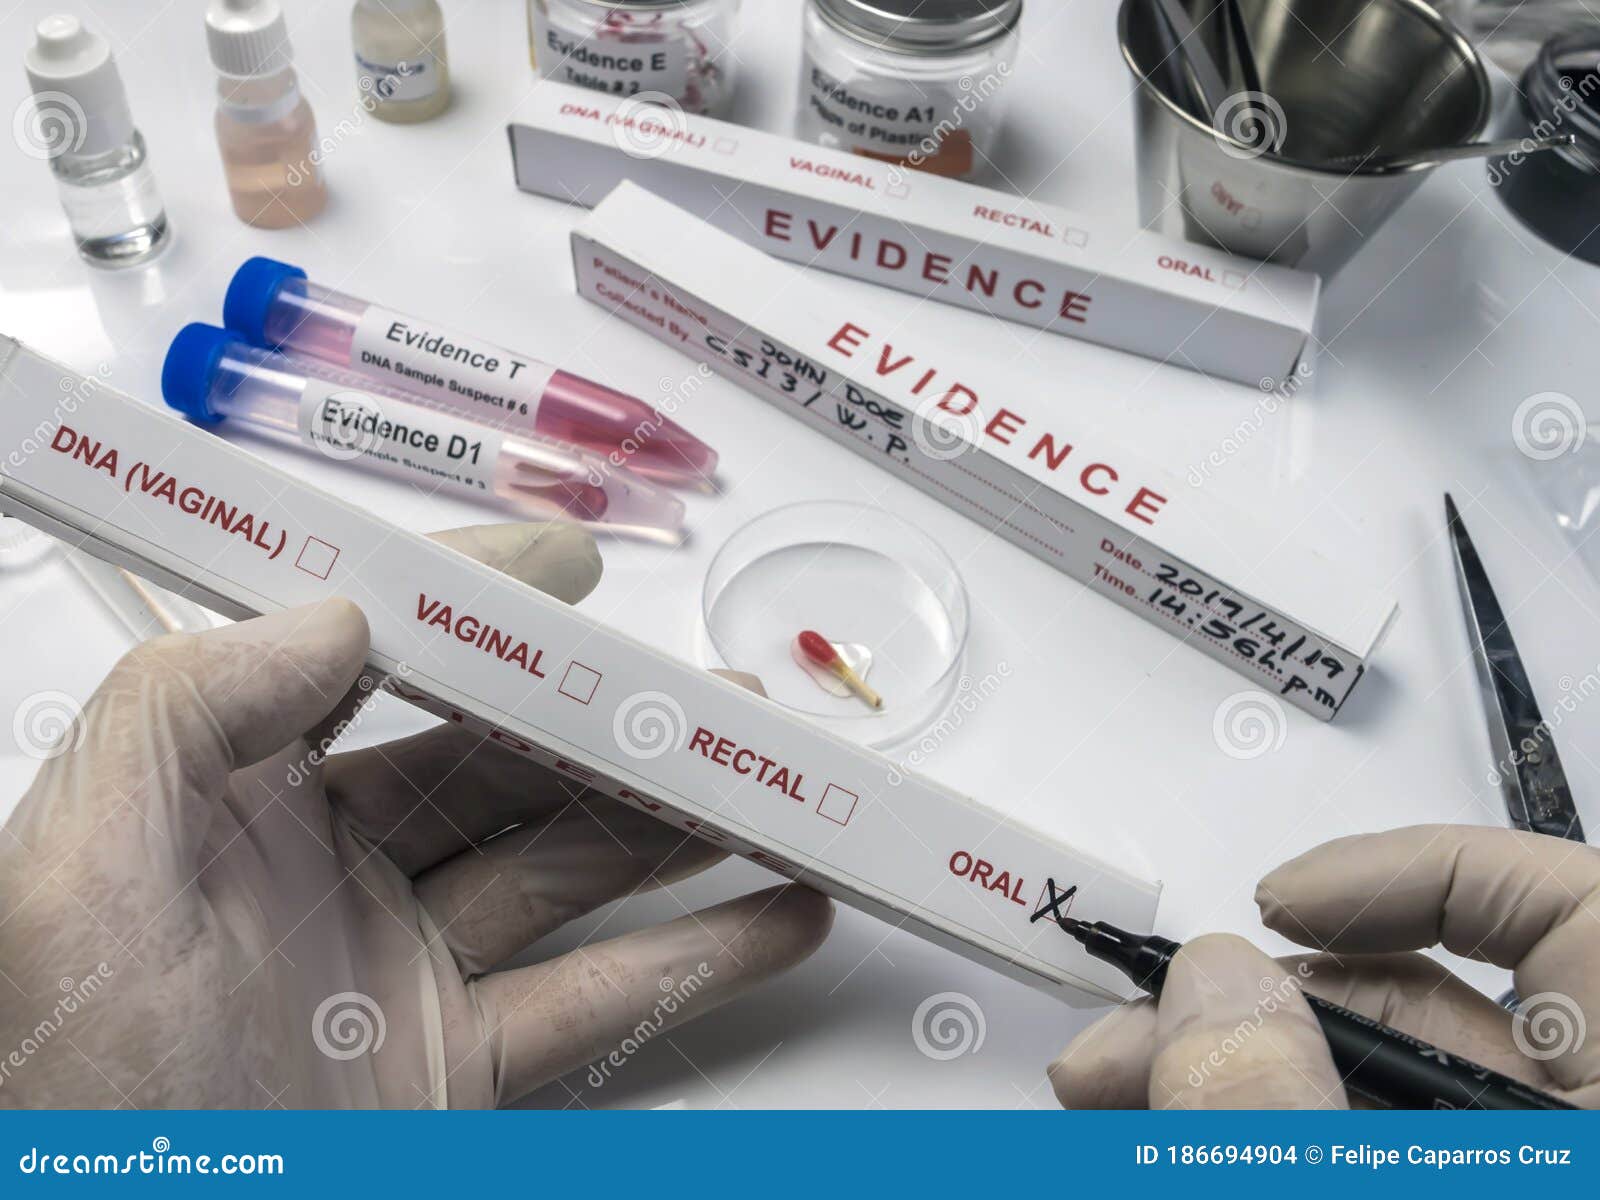 specialized criminal police check box for oral dna evidence in an evidence box